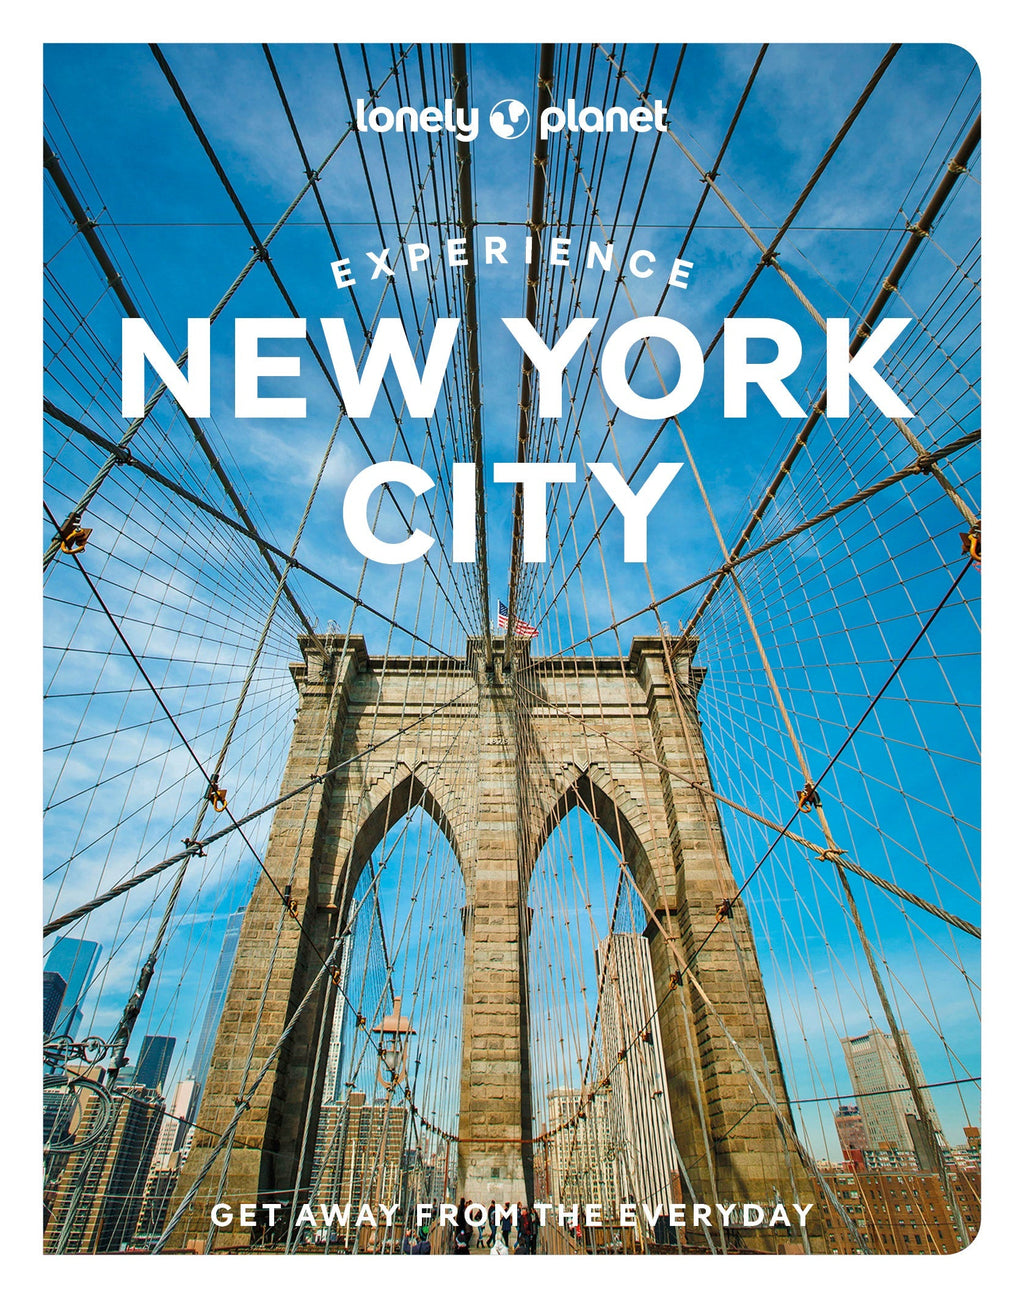 The ultimate 'Friends' guide to NYC - Lonely Planet